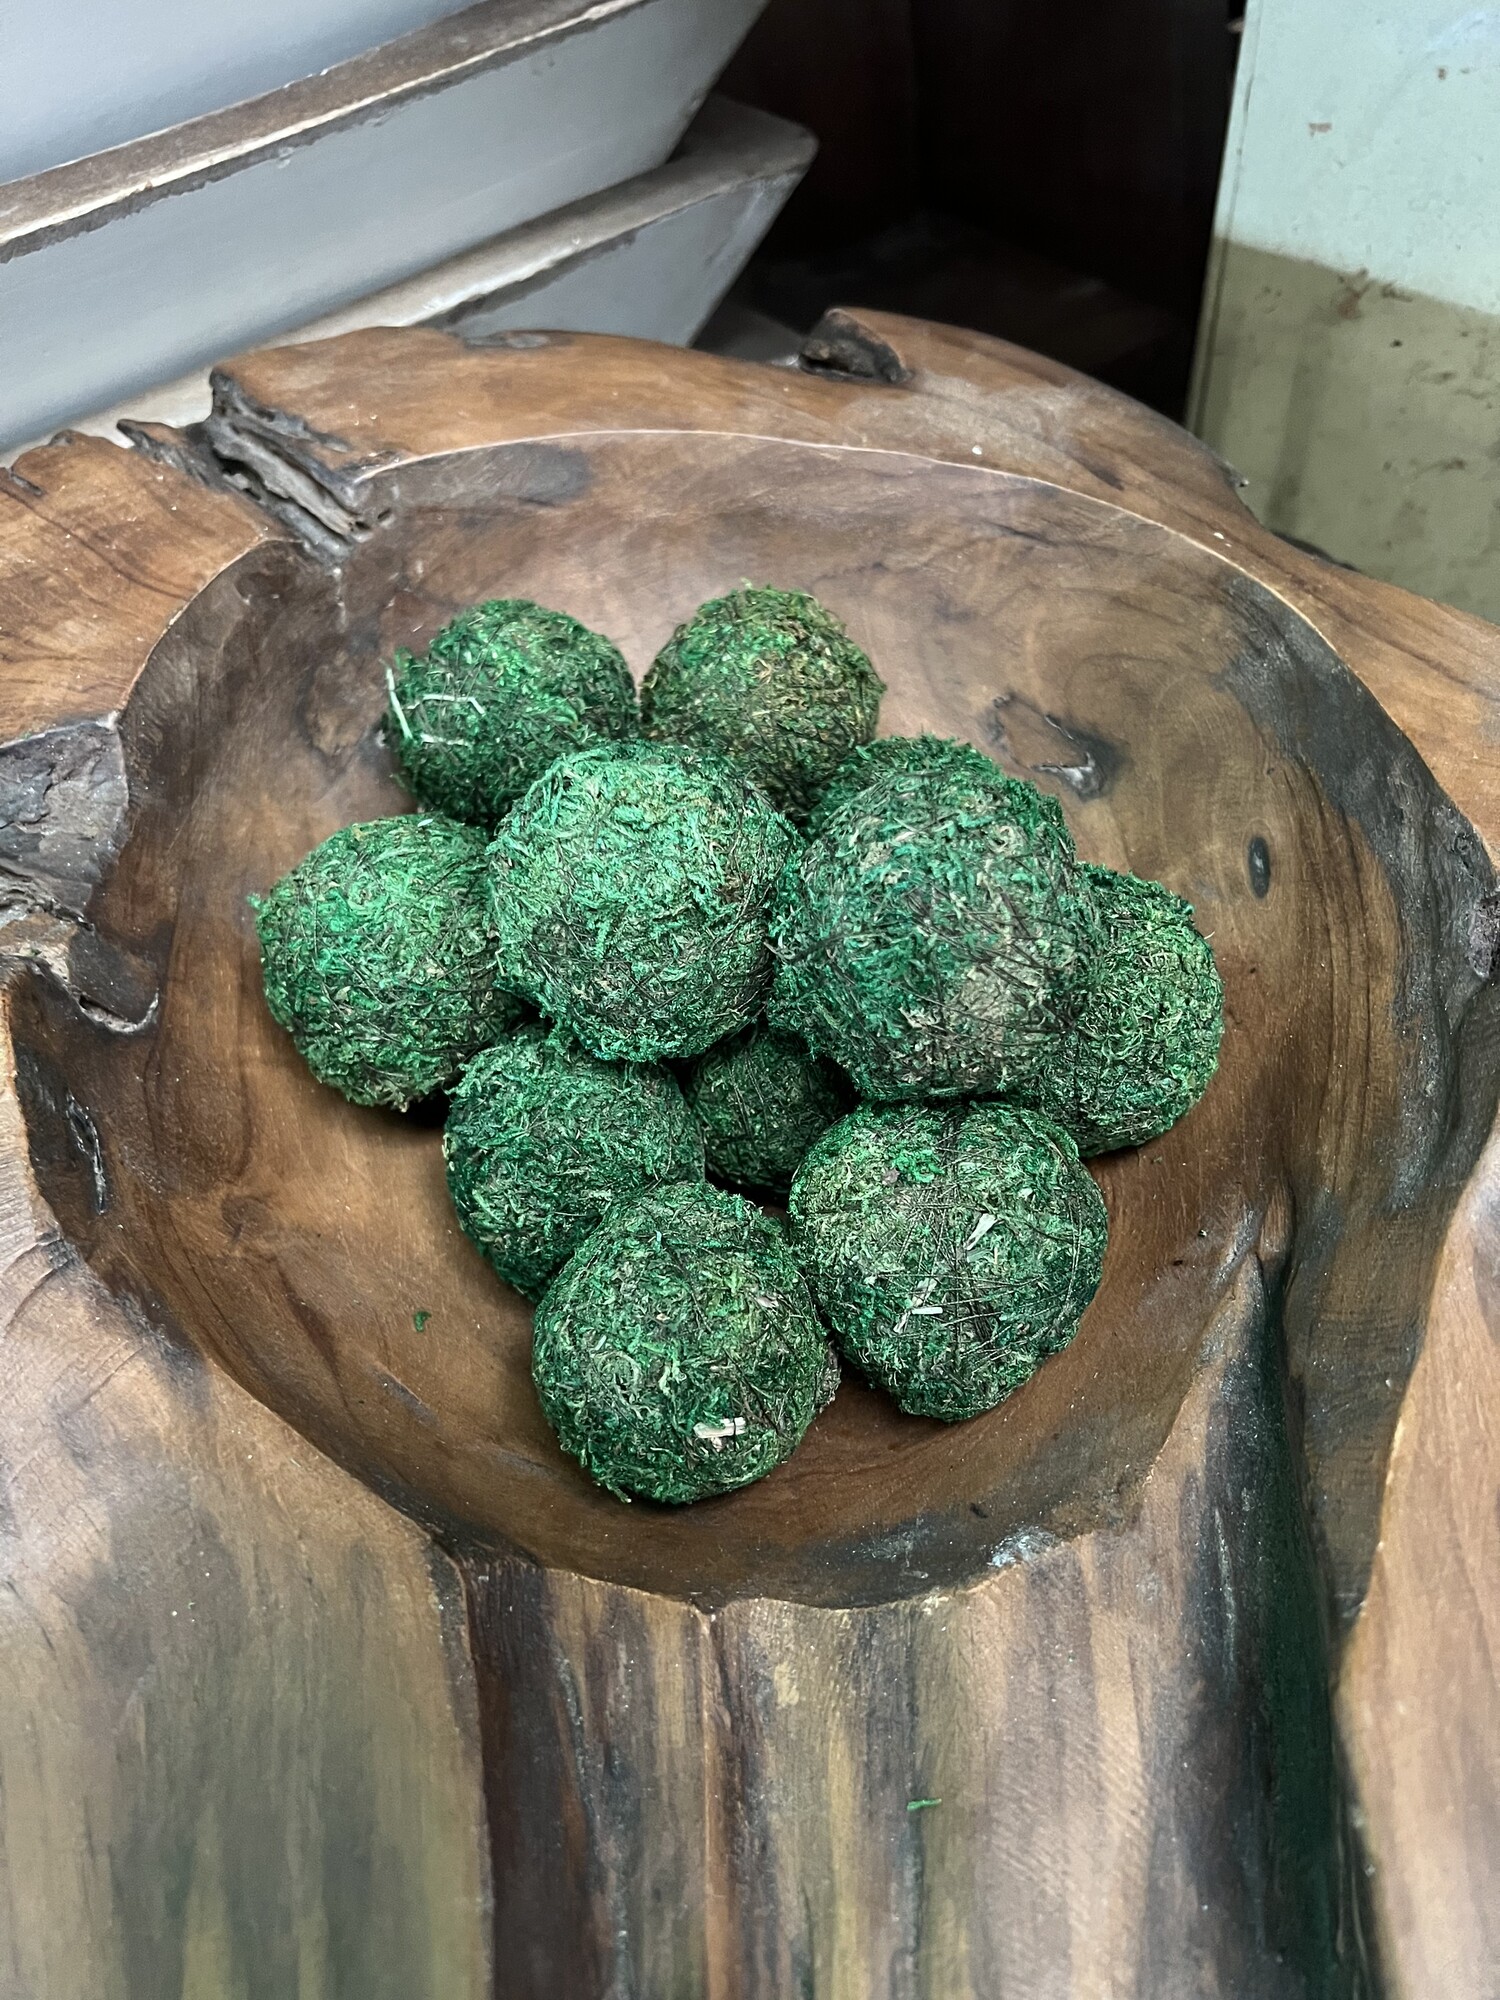 This pack of moss balls are perfect fillers for any display. Each pack contains 12 balls measuring 2 inches around